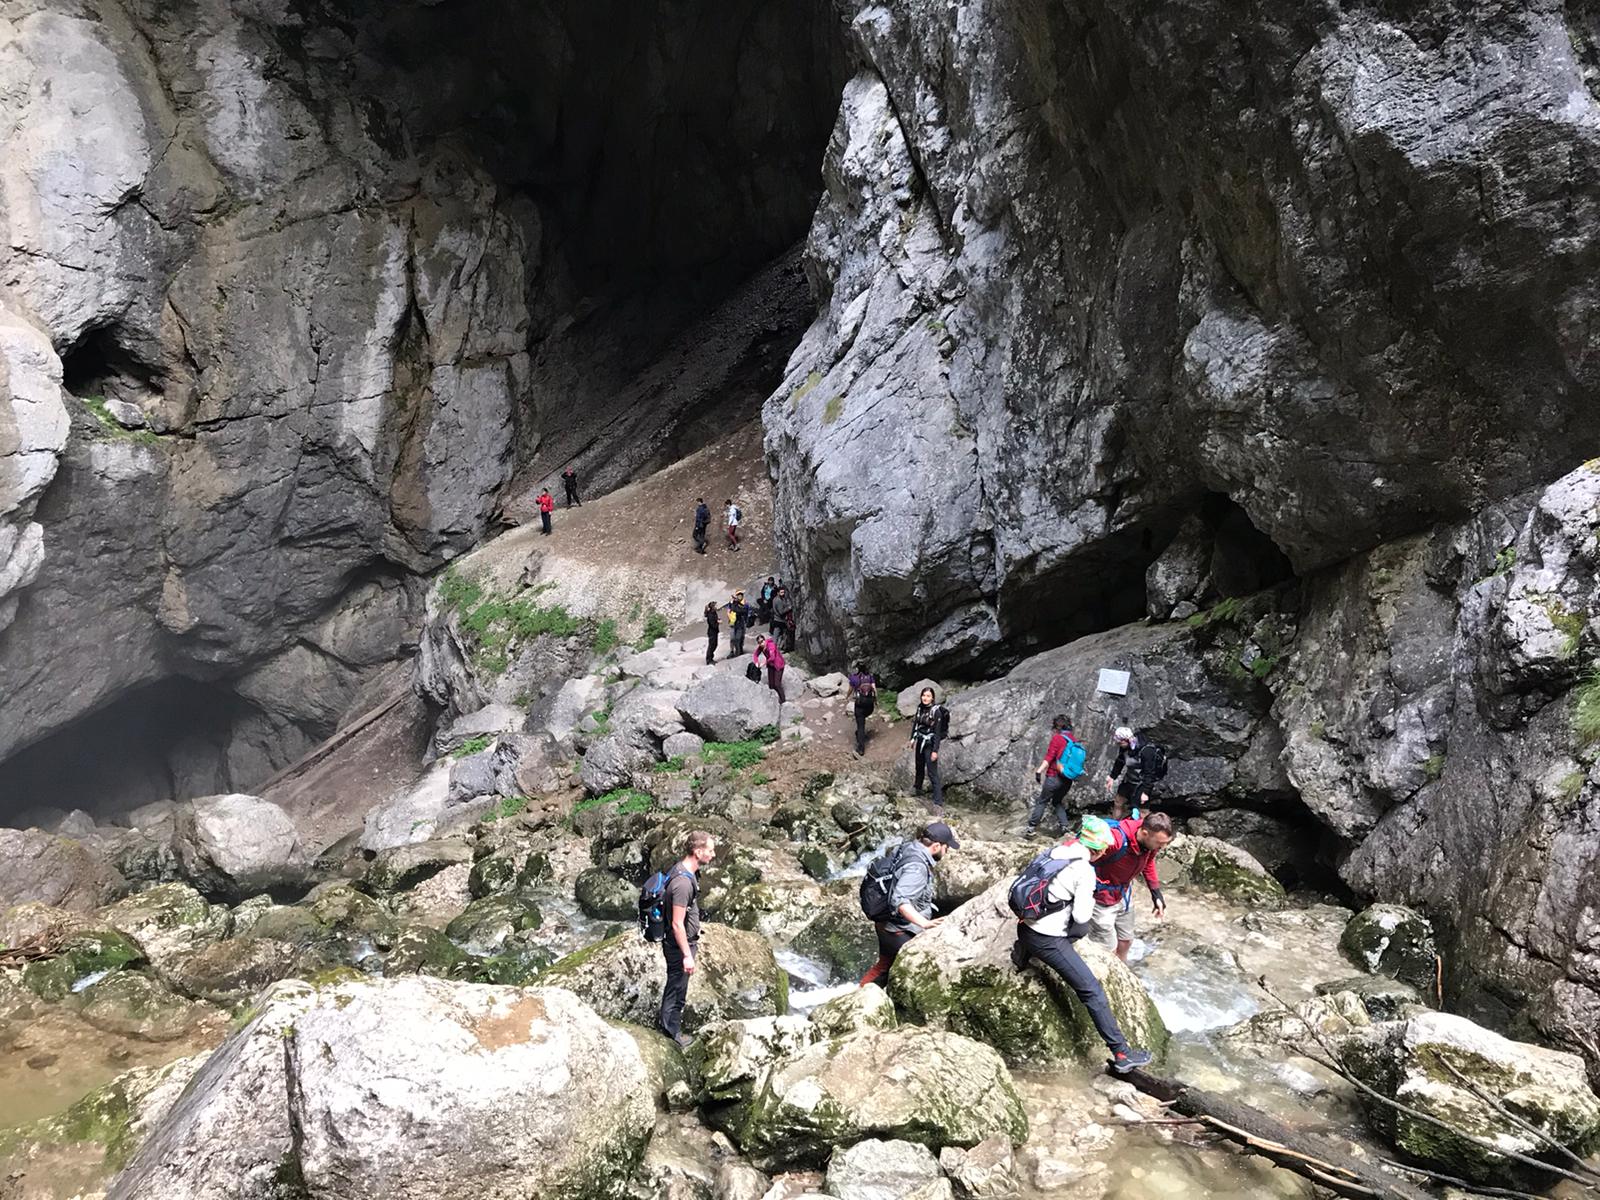 hiking in Romania's caves